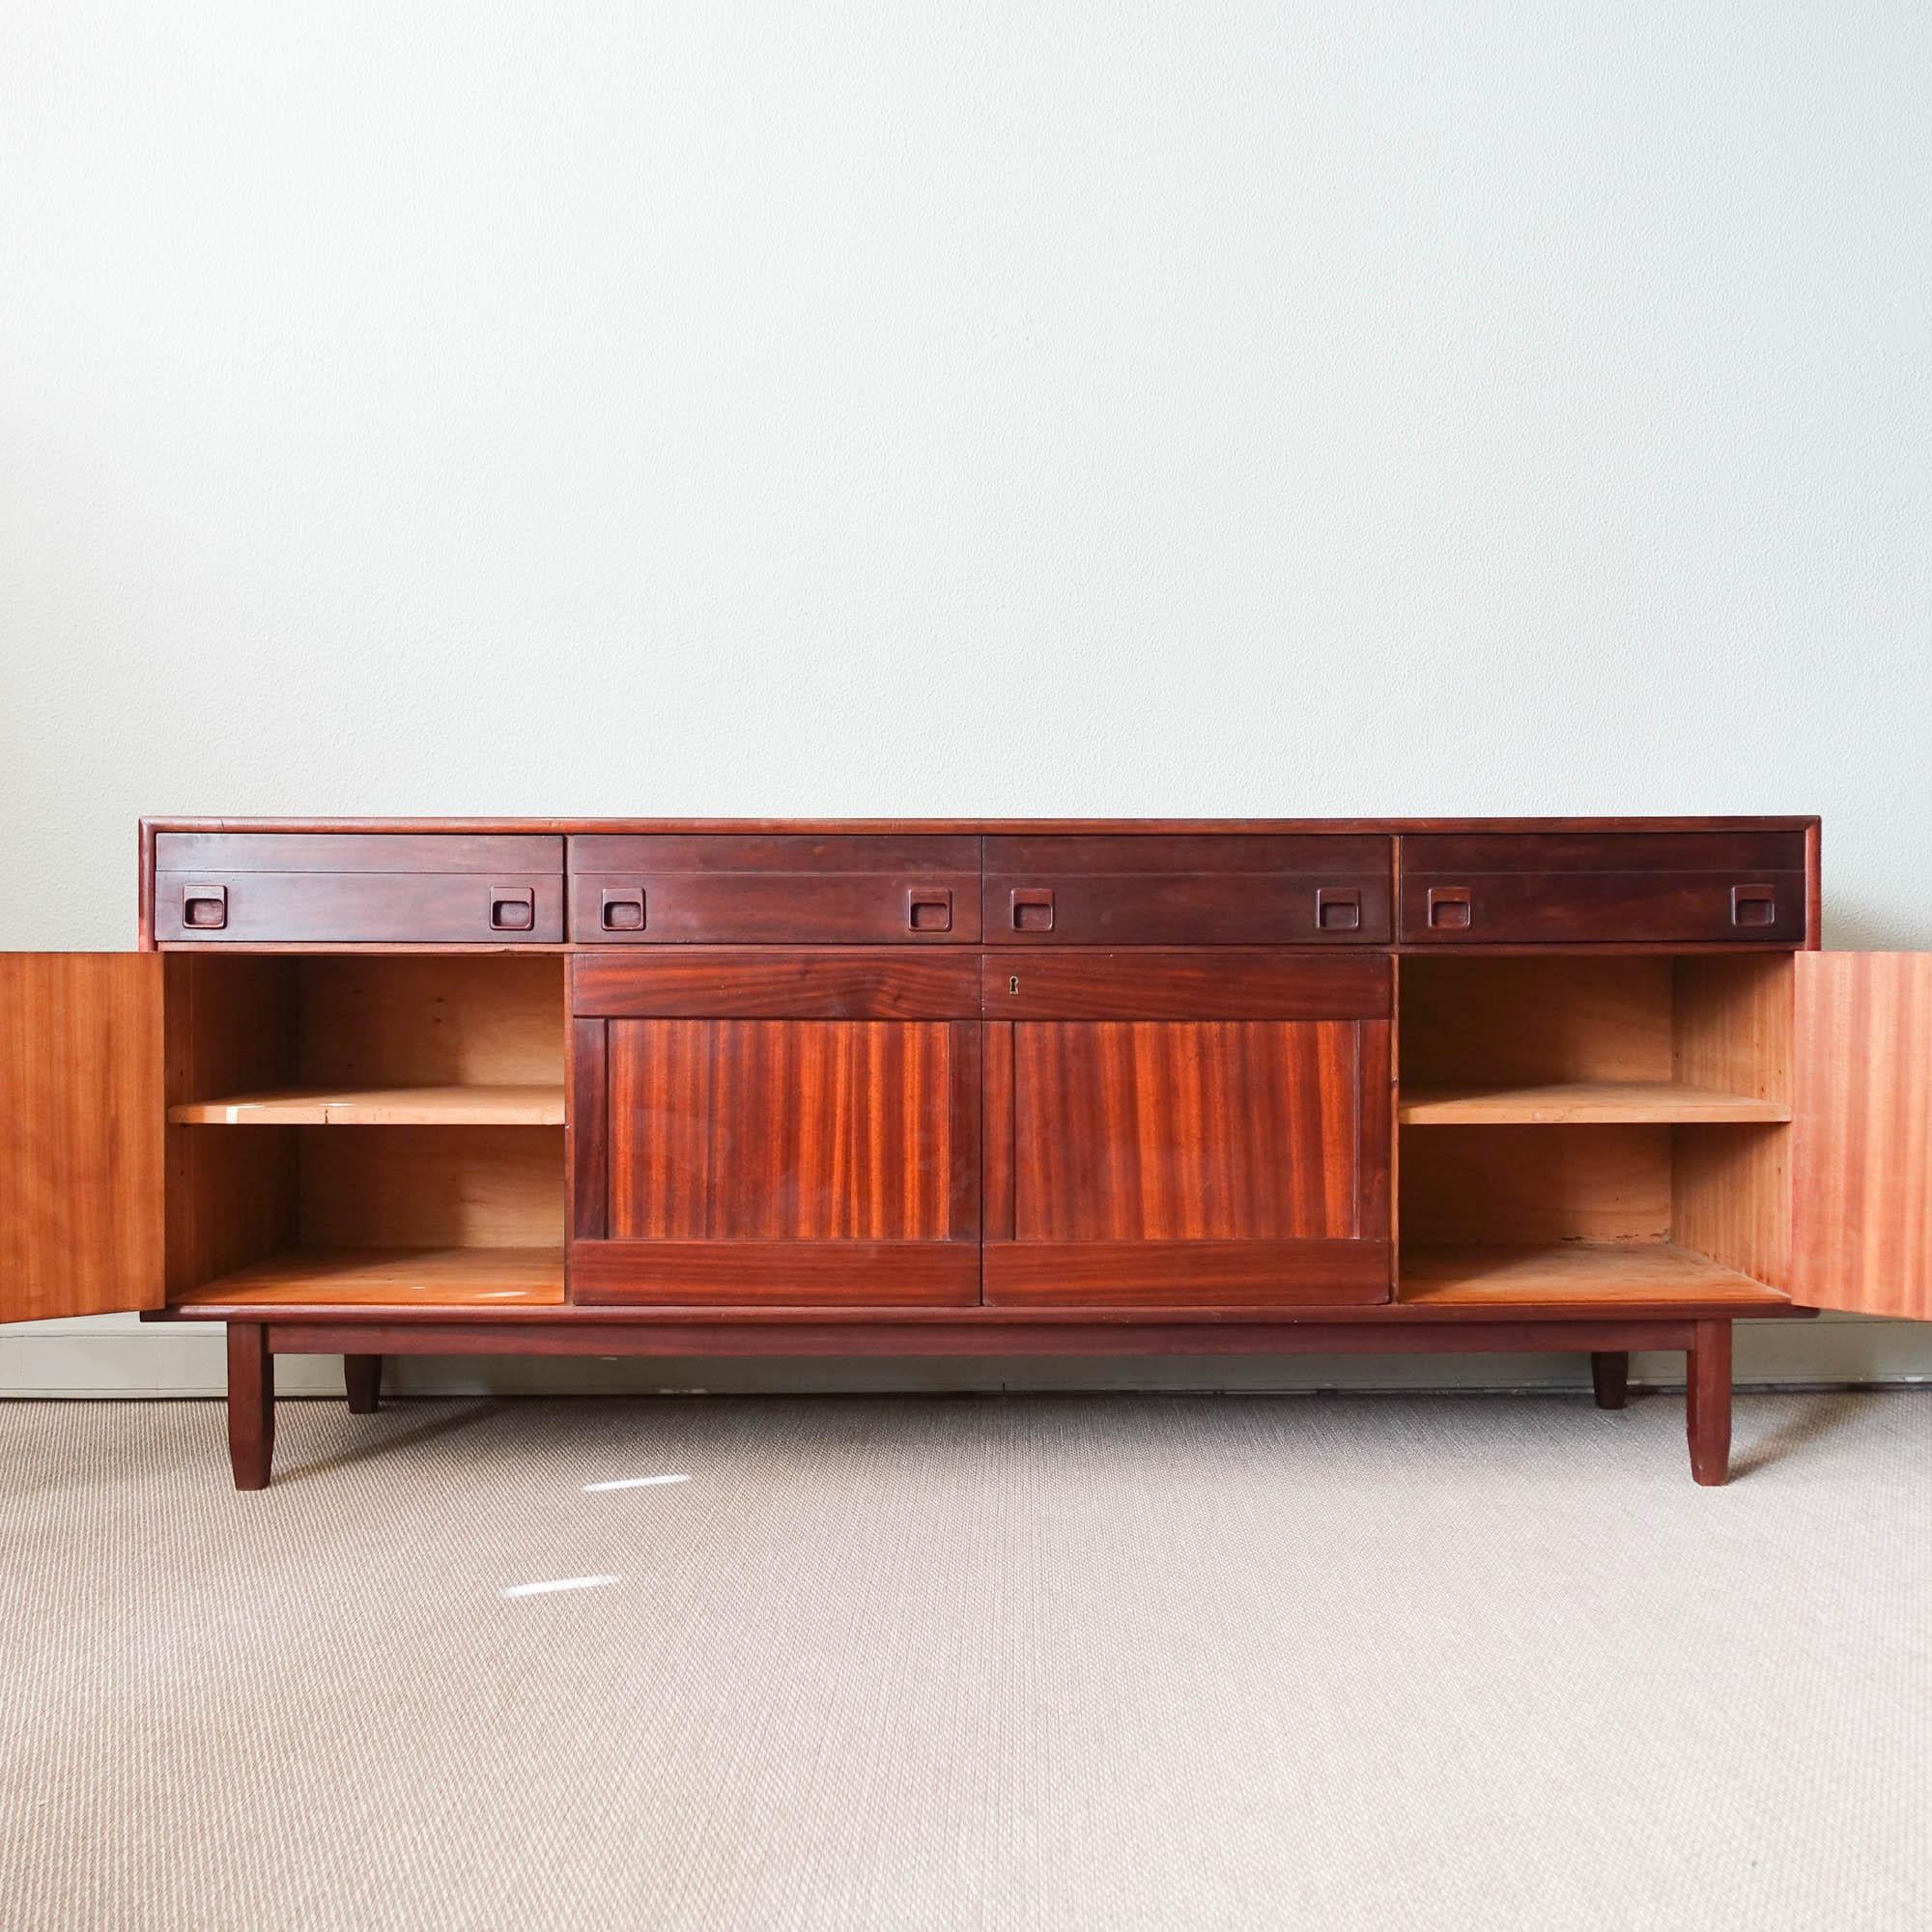 This sideboard was designed by José Espinho and produced by Olaio, in Portugal, during the 1970's. It is made of mutenye with square wooden handles. It features four drawers and four doors, that conceal storage space behind. In original condition.